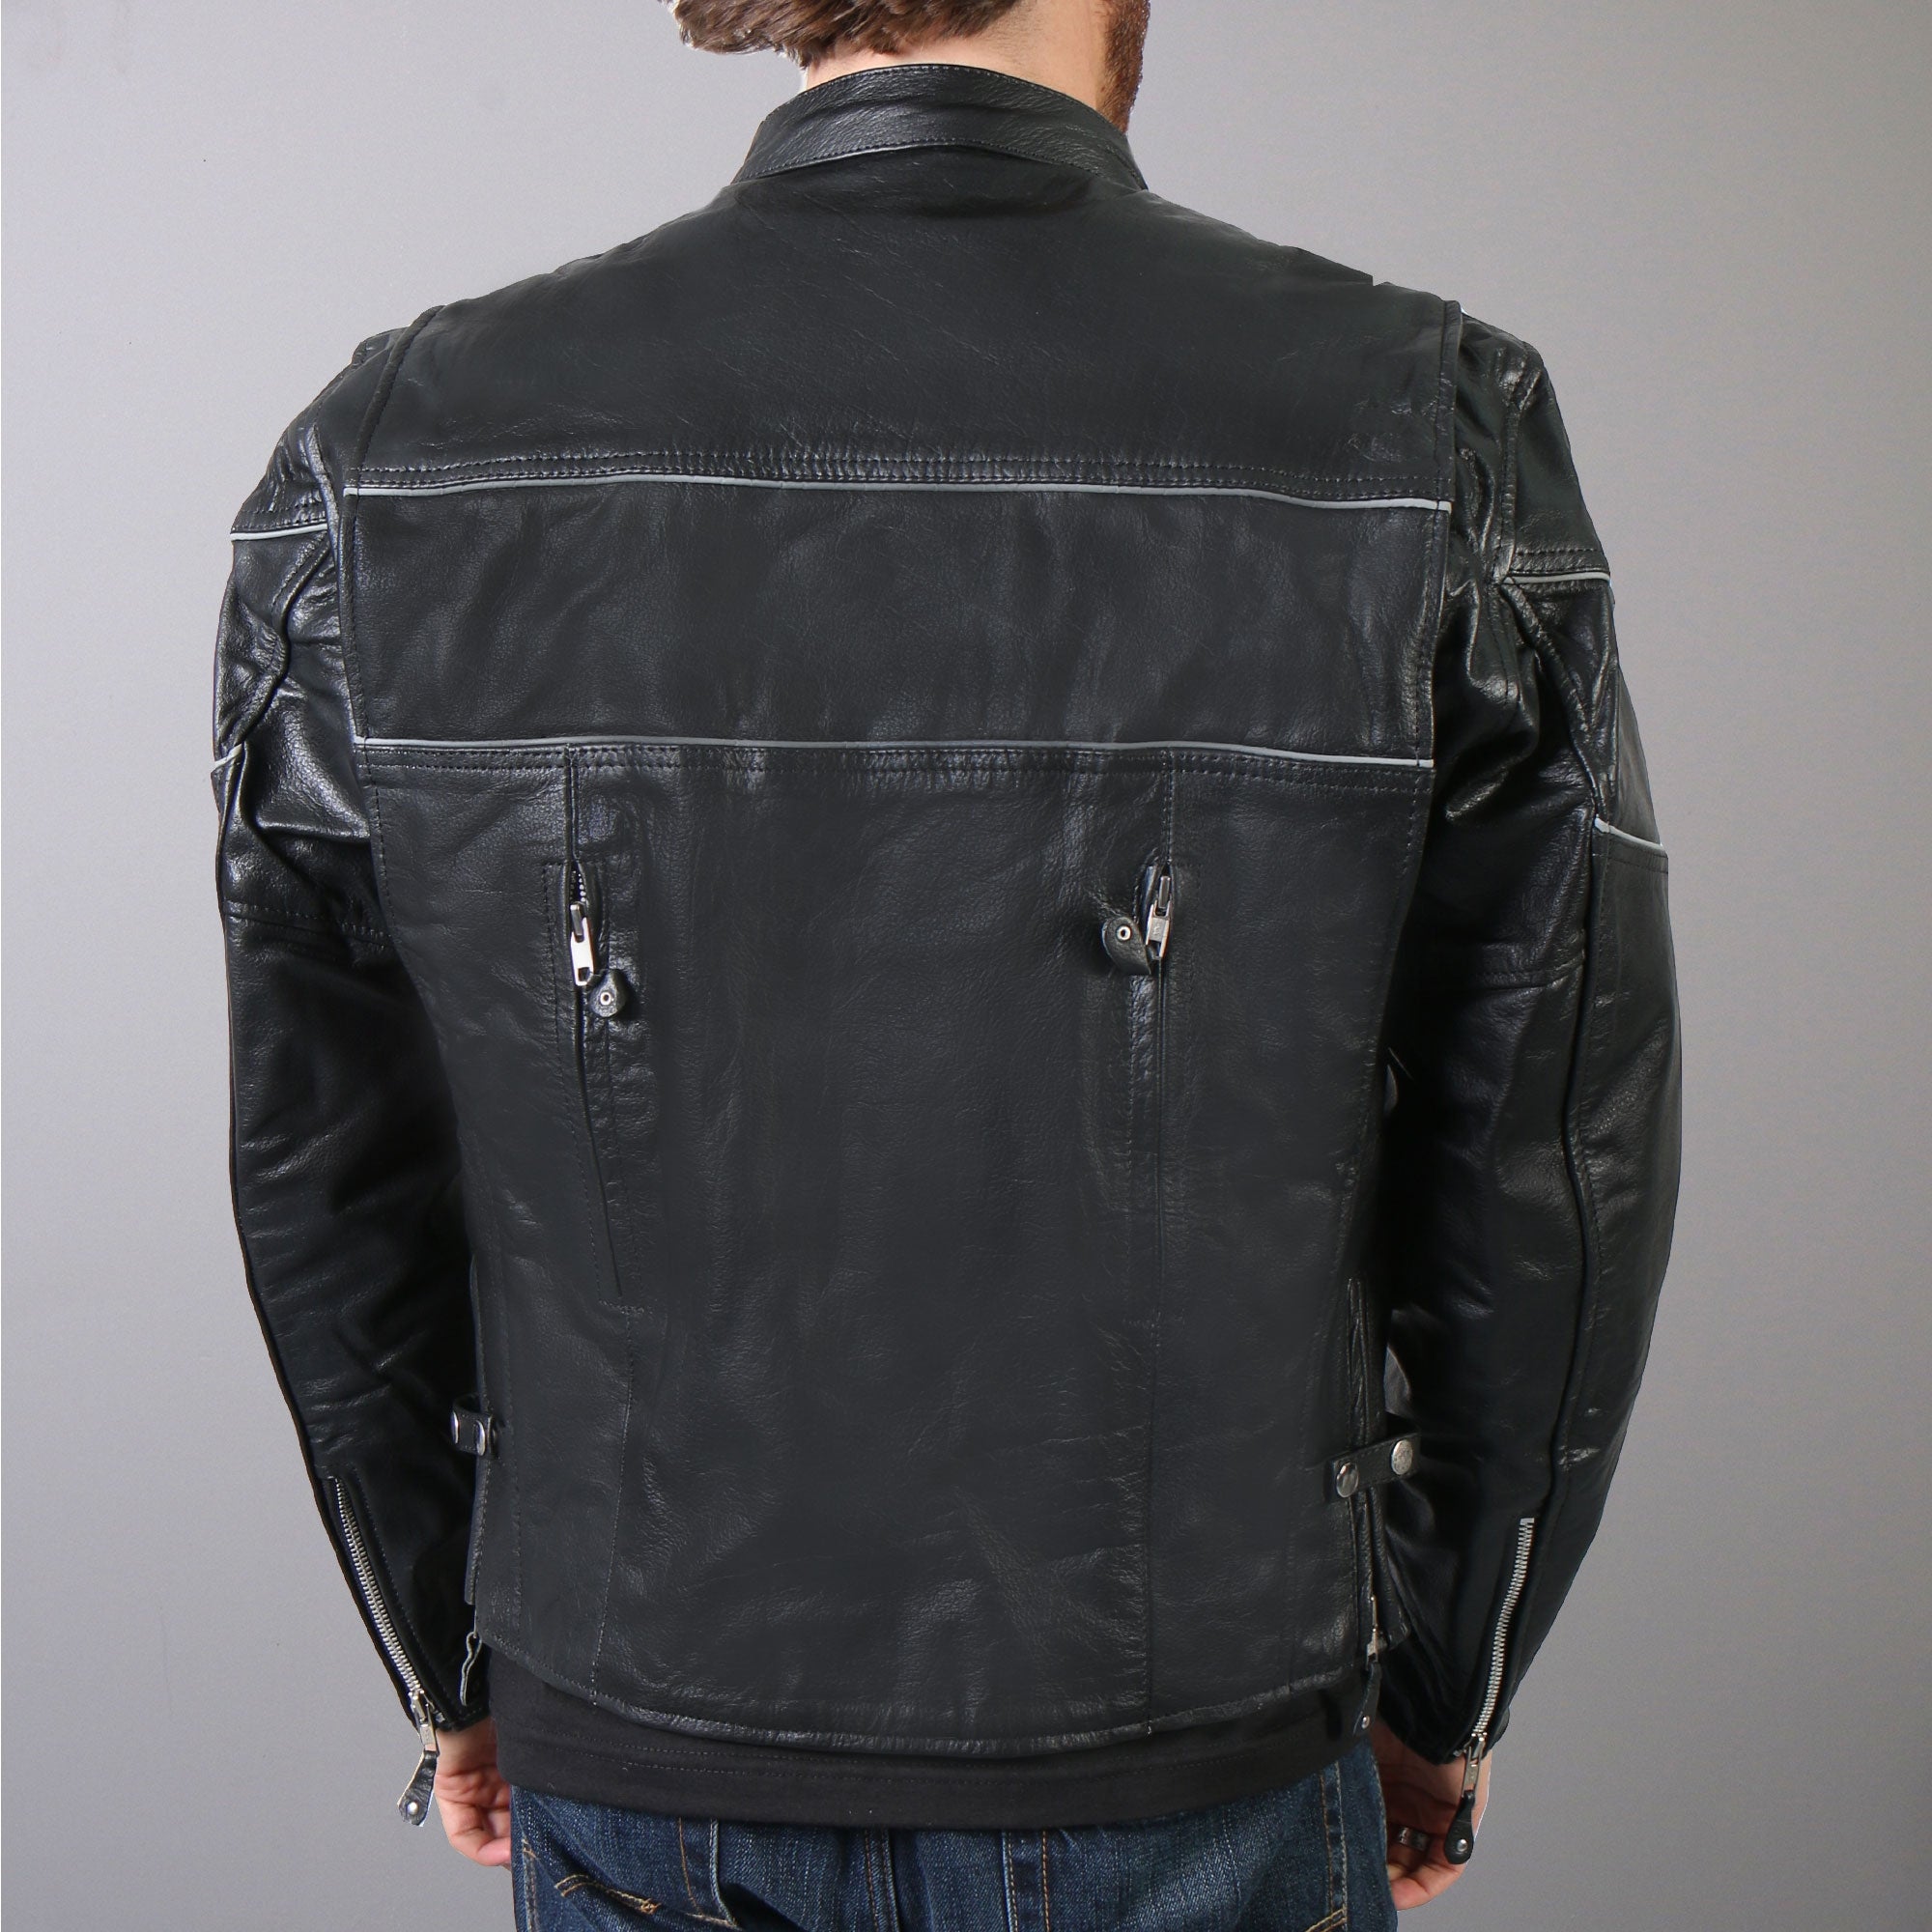 Hot Leathers JKM1004 Men's Leather Motorcycle Vented Scooter Biker Jacket with Reflective Piping